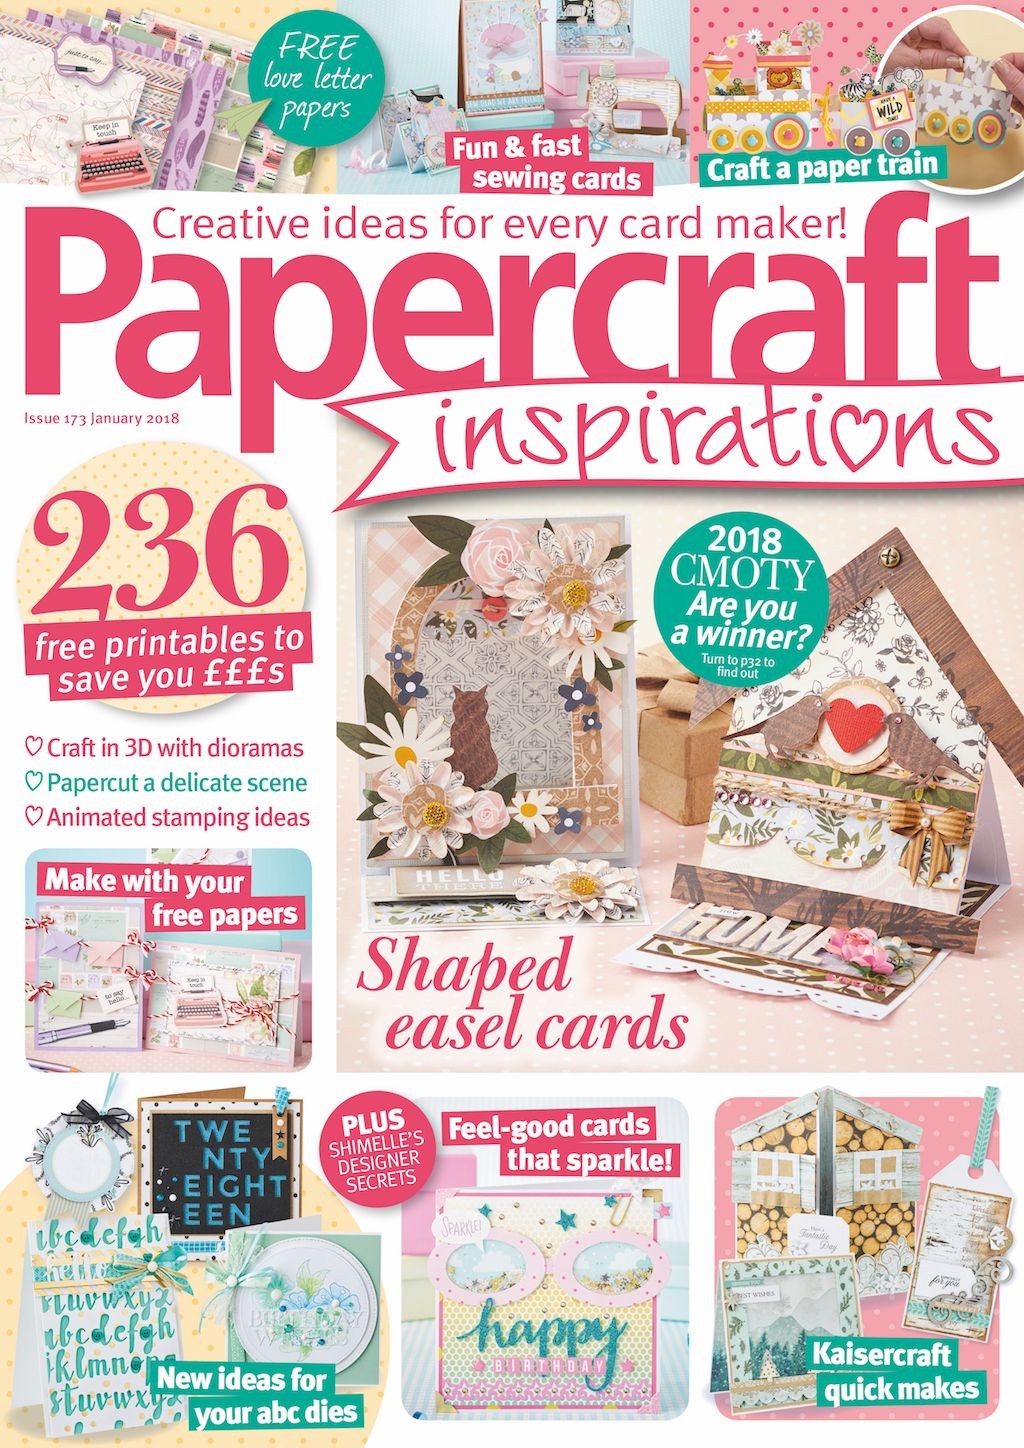 Papercraft Inspiration Papercraft Inspirations Magazine issue 173